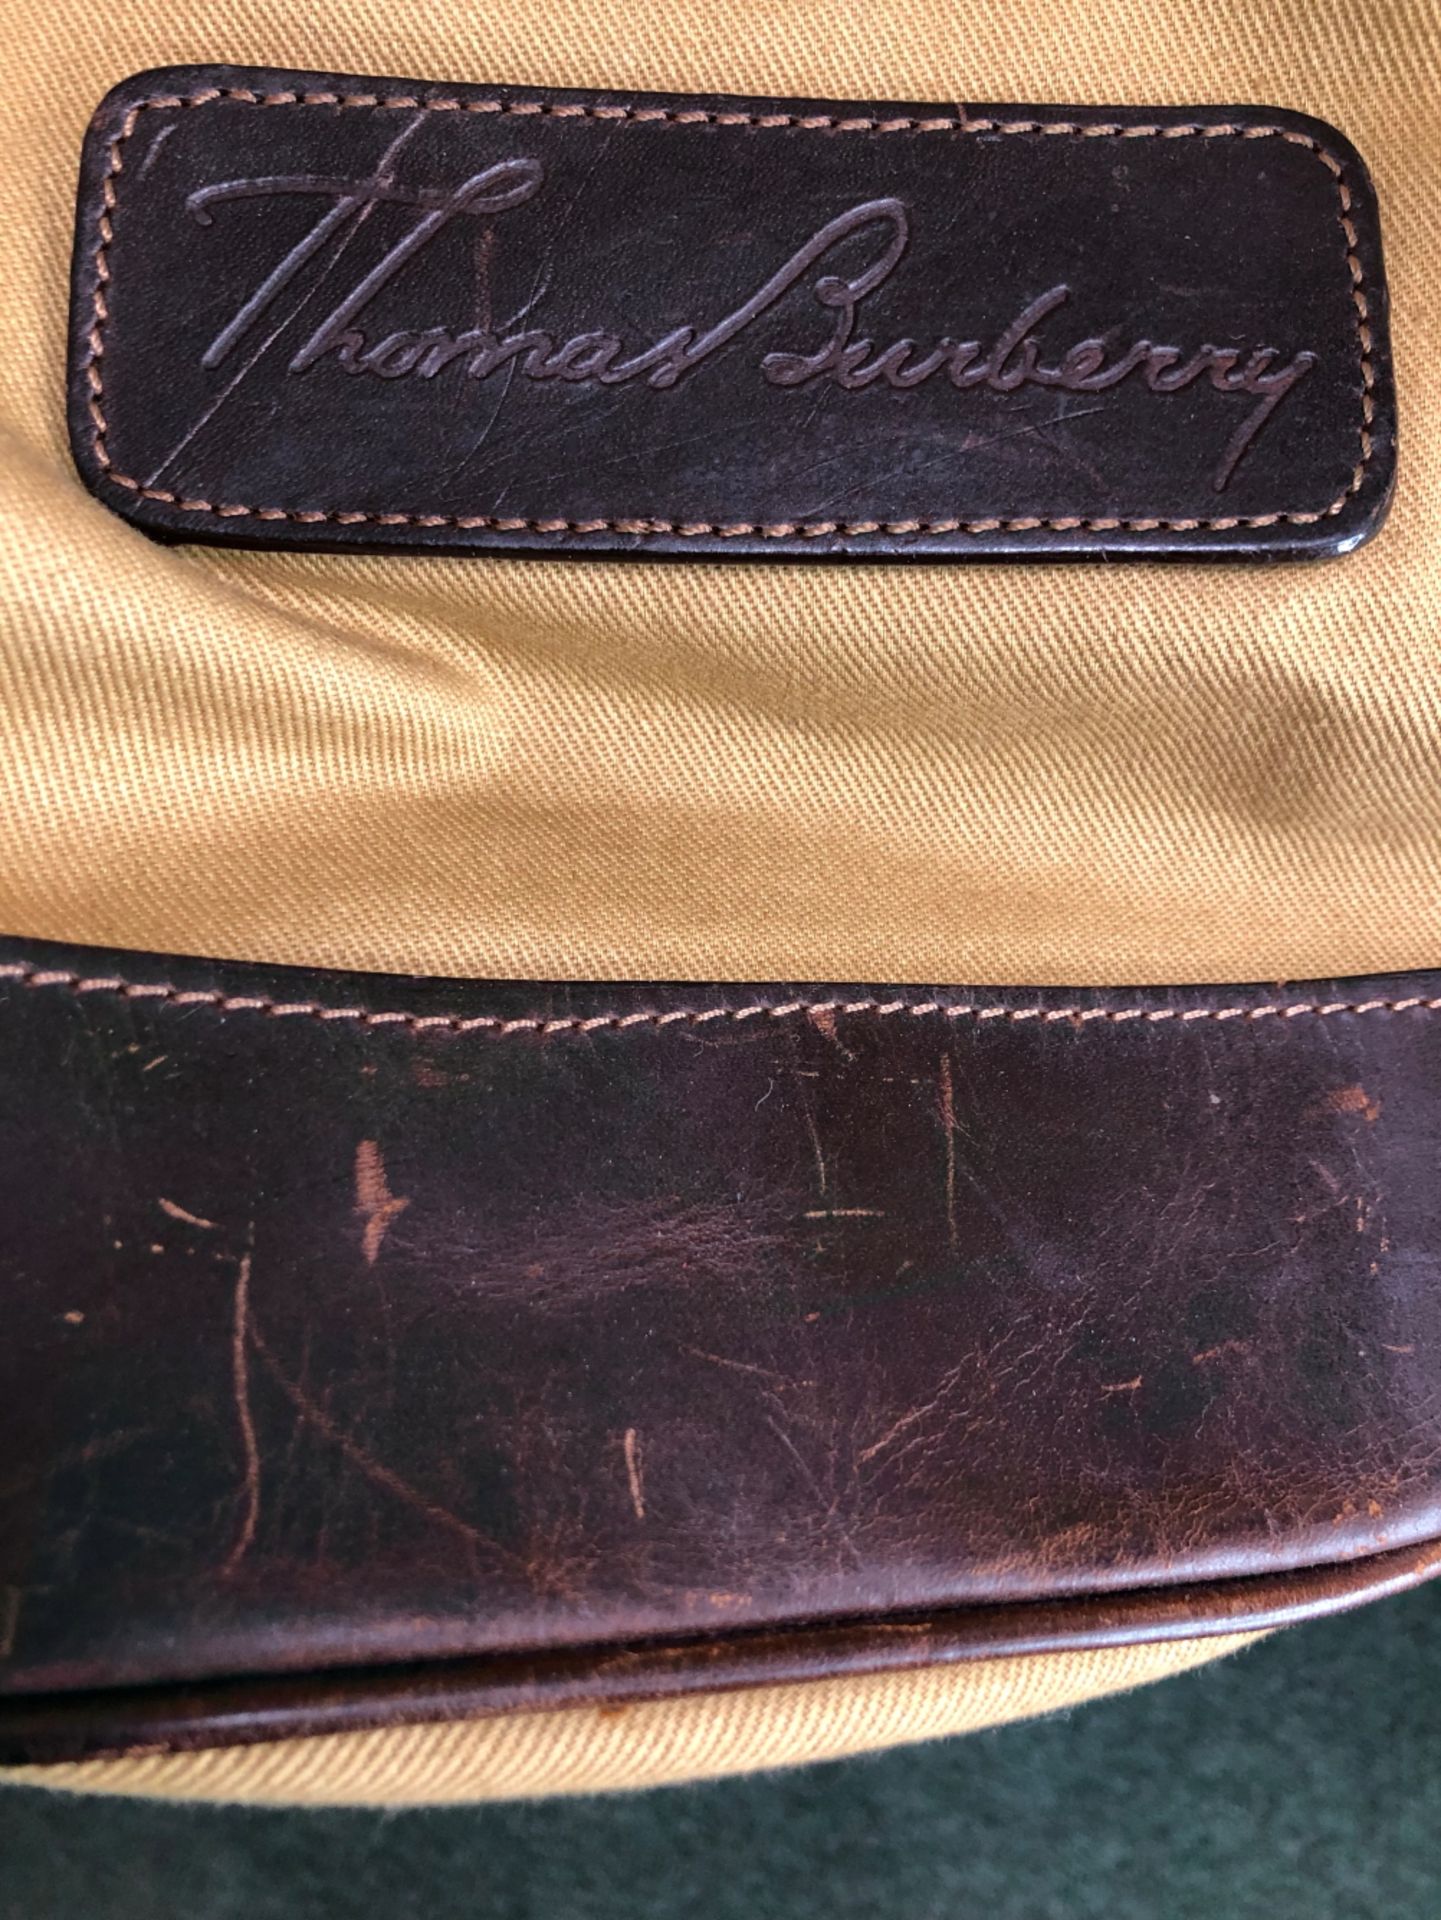 A THOMAS BURBERRY CANVAS BACK PACK. - Image 6 of 8